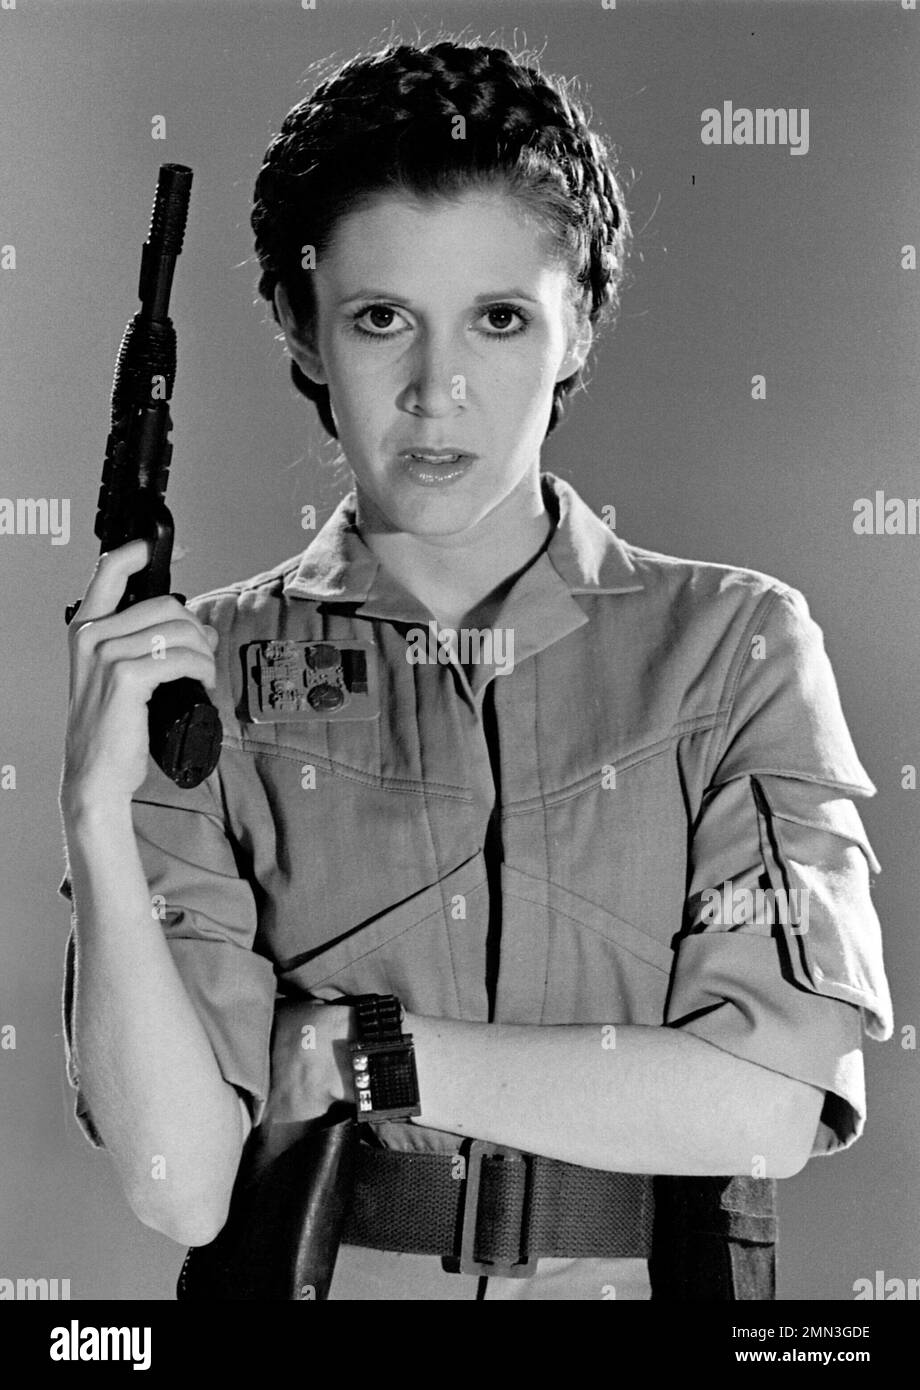 CARRIE FISHER in STAR WARS: EPISODE VI-RETURN OF THE JEDI (1983), directed by RICHARD MARQUAND. Credit: LUCASFILM/20TH CENTURY FOX / Album Stock Photo